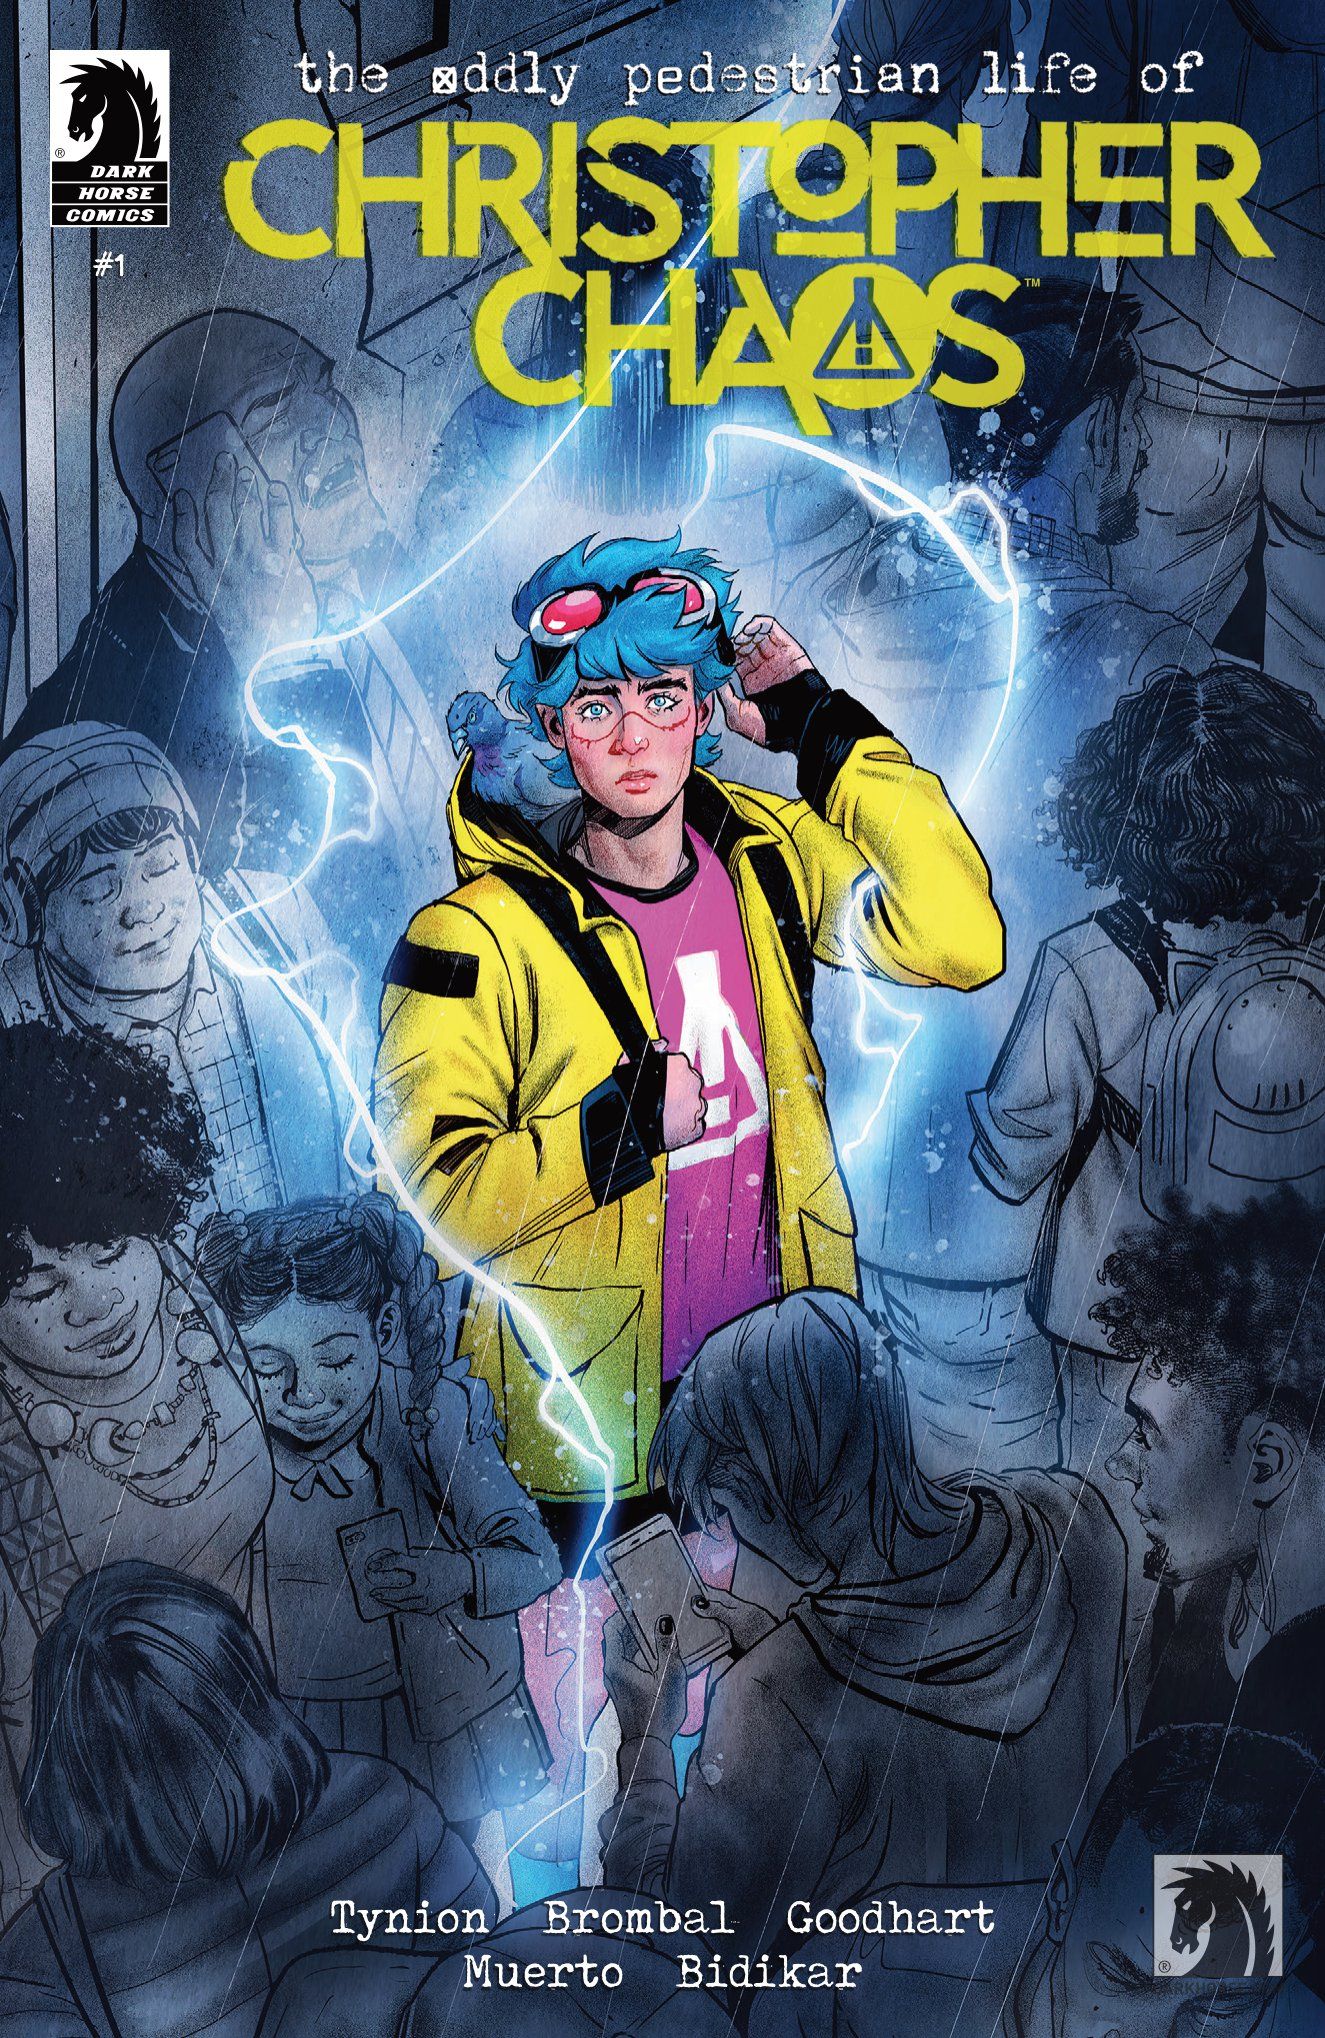 The Oddly Pedestrian Life of Christopher Chaos #1 ACover by Nick Robles